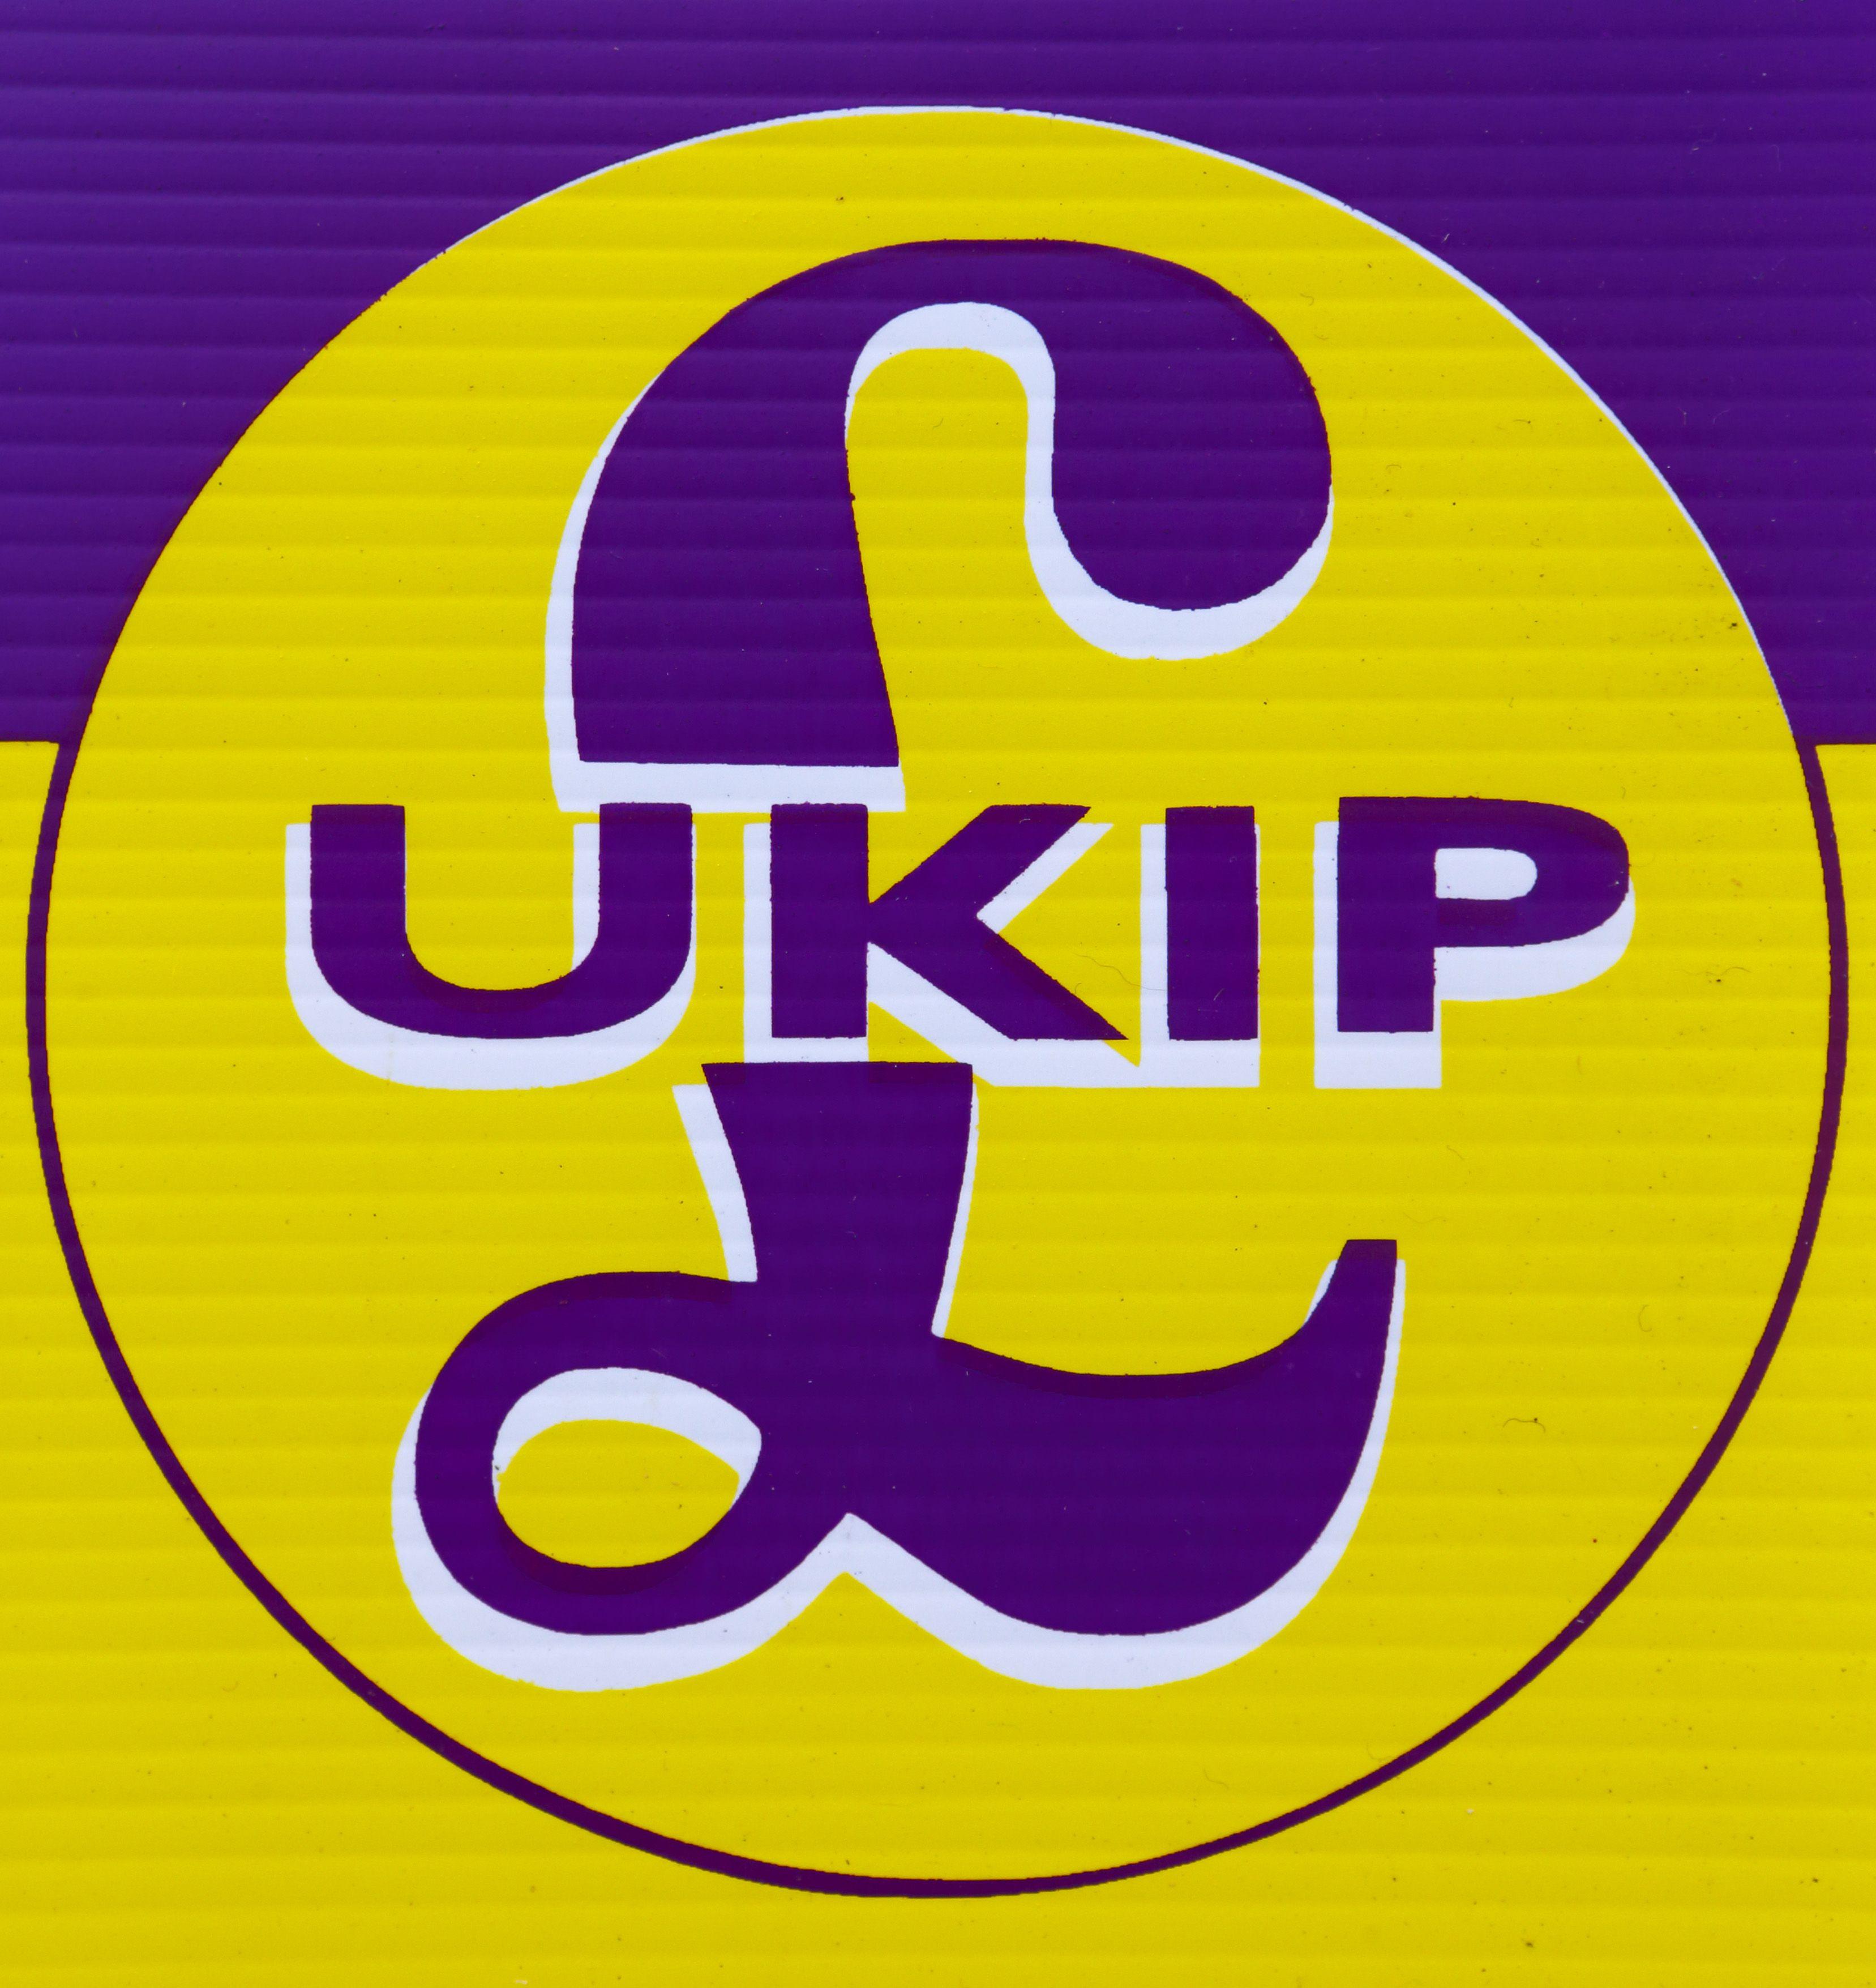 Yellow and Purple Lion Logo - All the reaction to Ukip's new logo as the Premier League seeks ...